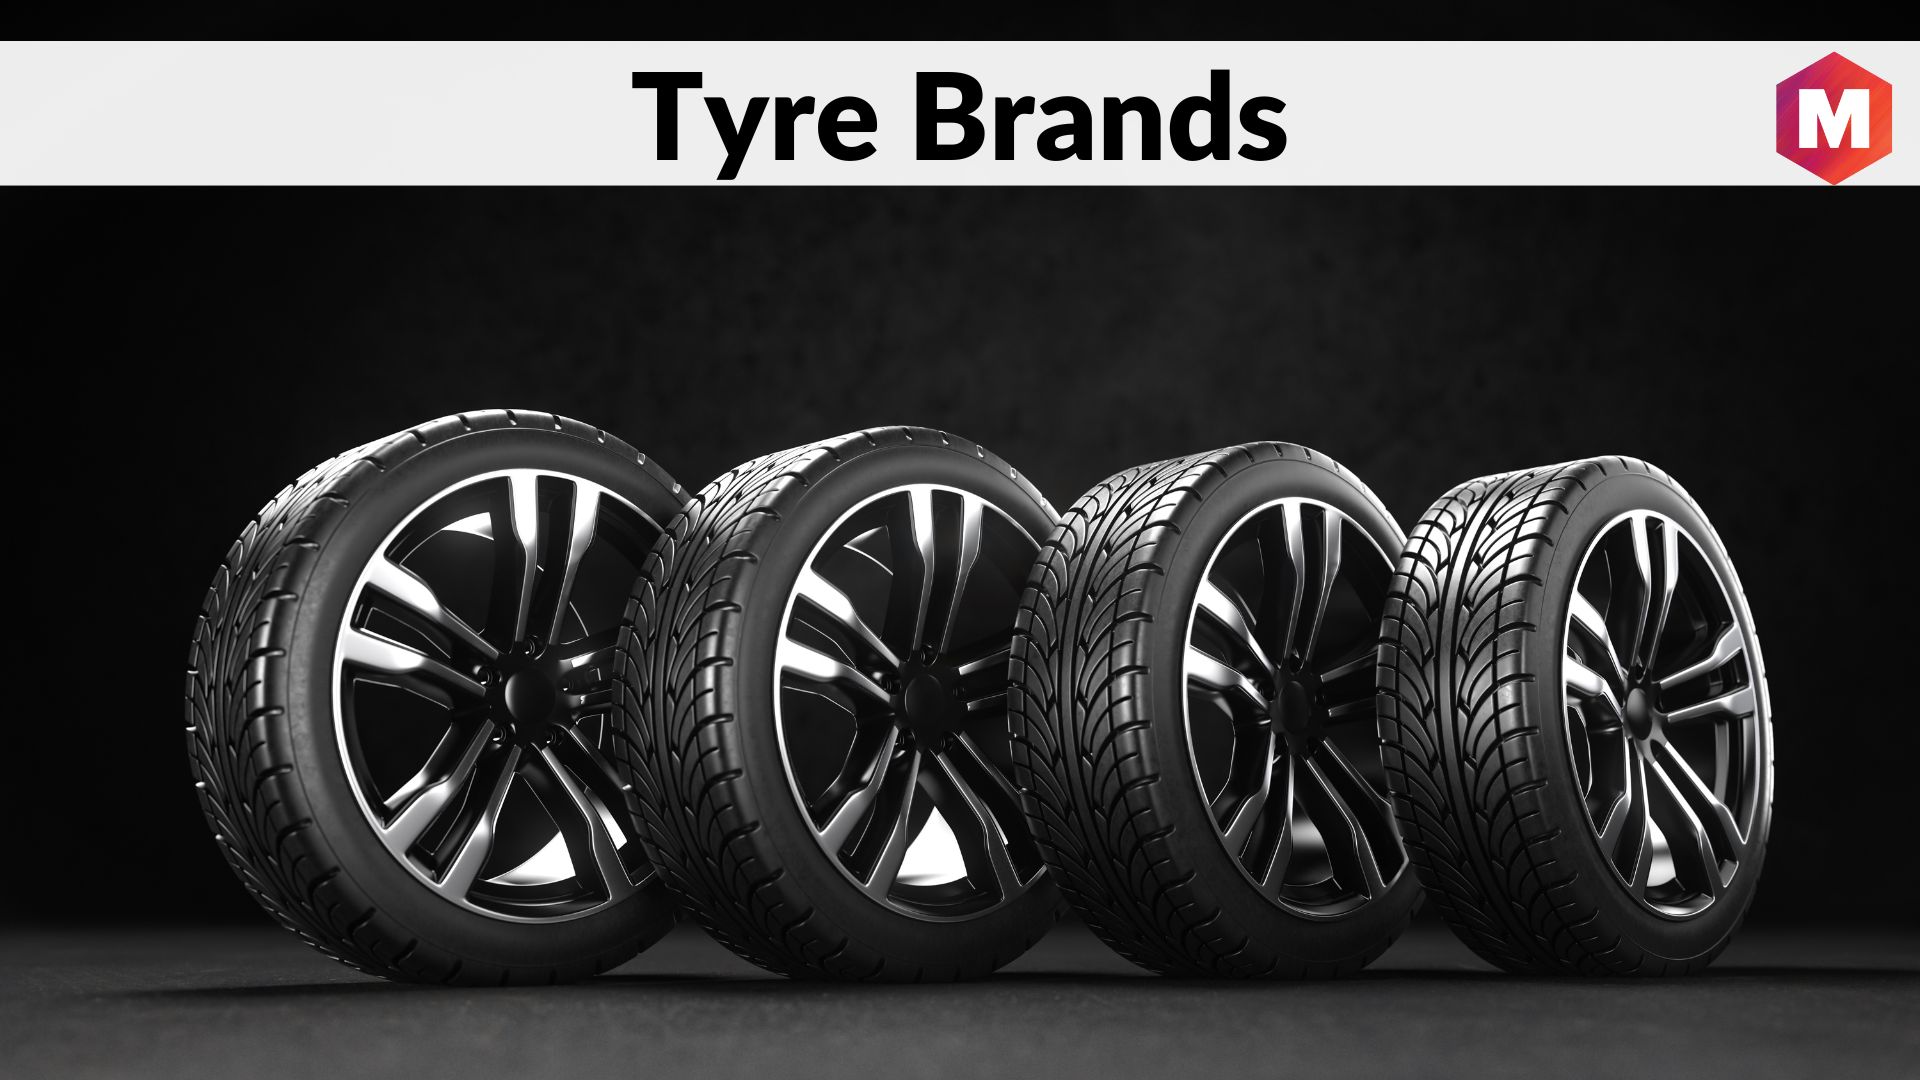 Top 10 Tyre Companies in the World Top Tyre Brands in the world